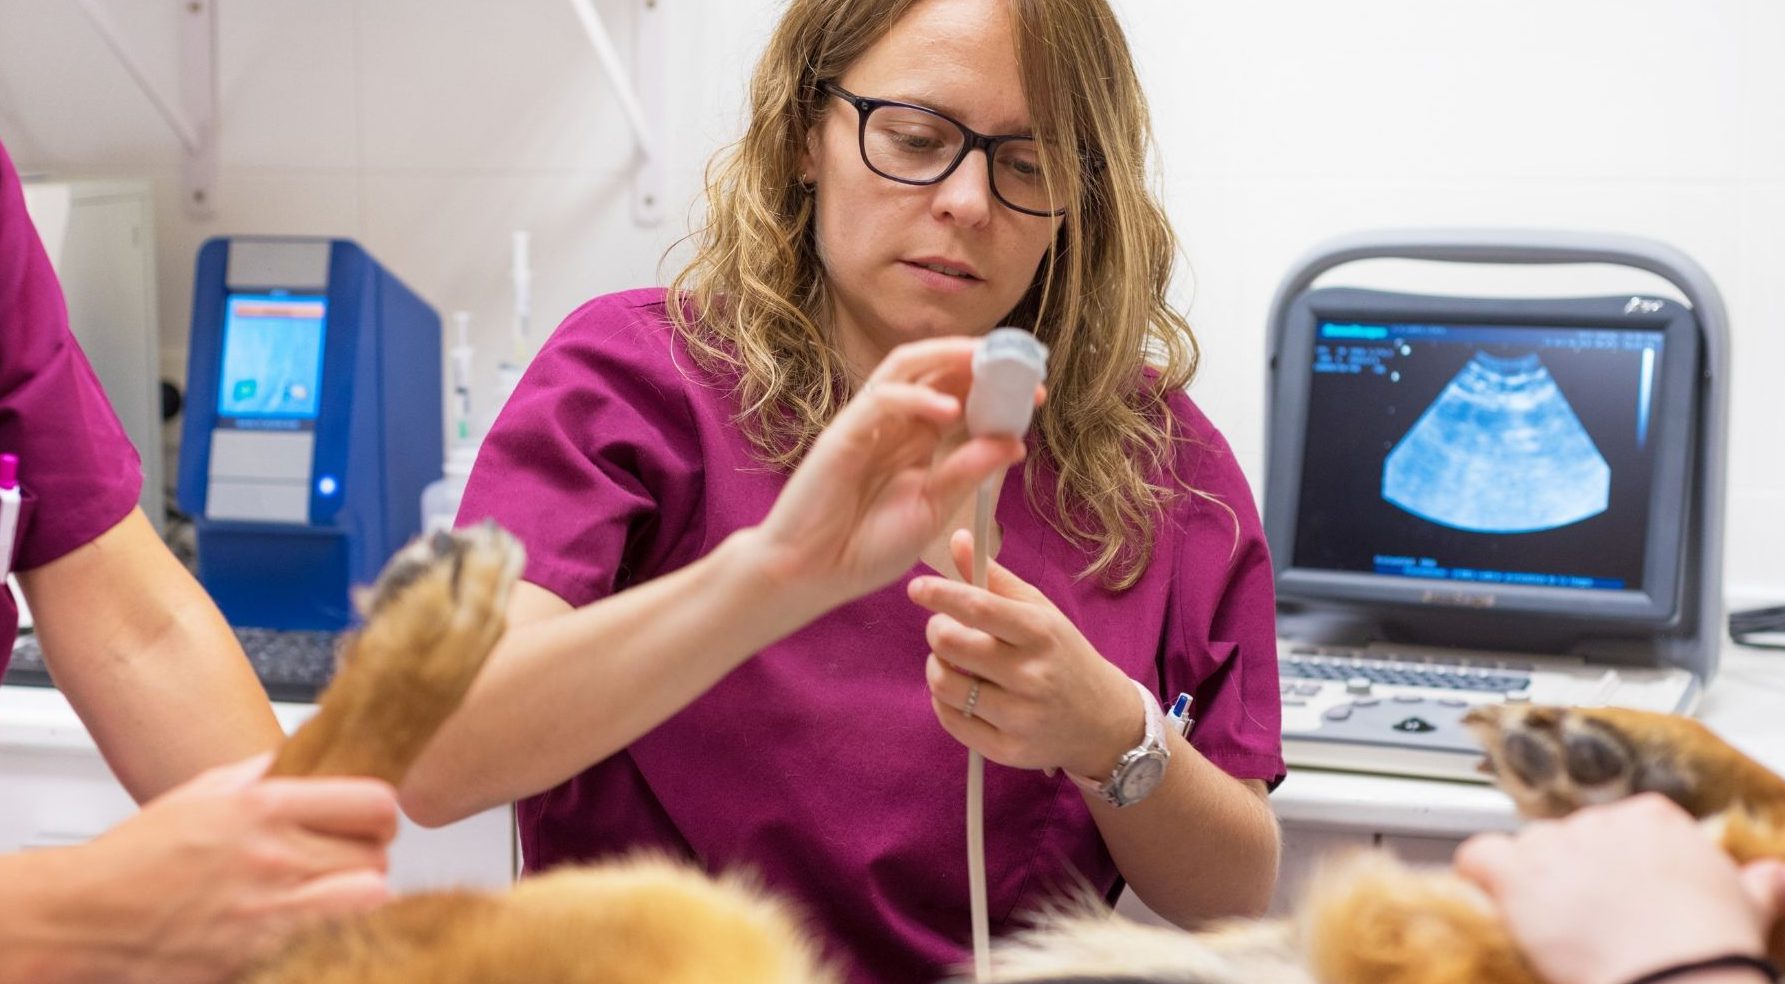 Best Prospects In The Global Veterinary Patient Monitoring Equipment Market And Strategies For Growth – Includes Veterinary Patient Monitoring Equipment Market Growth